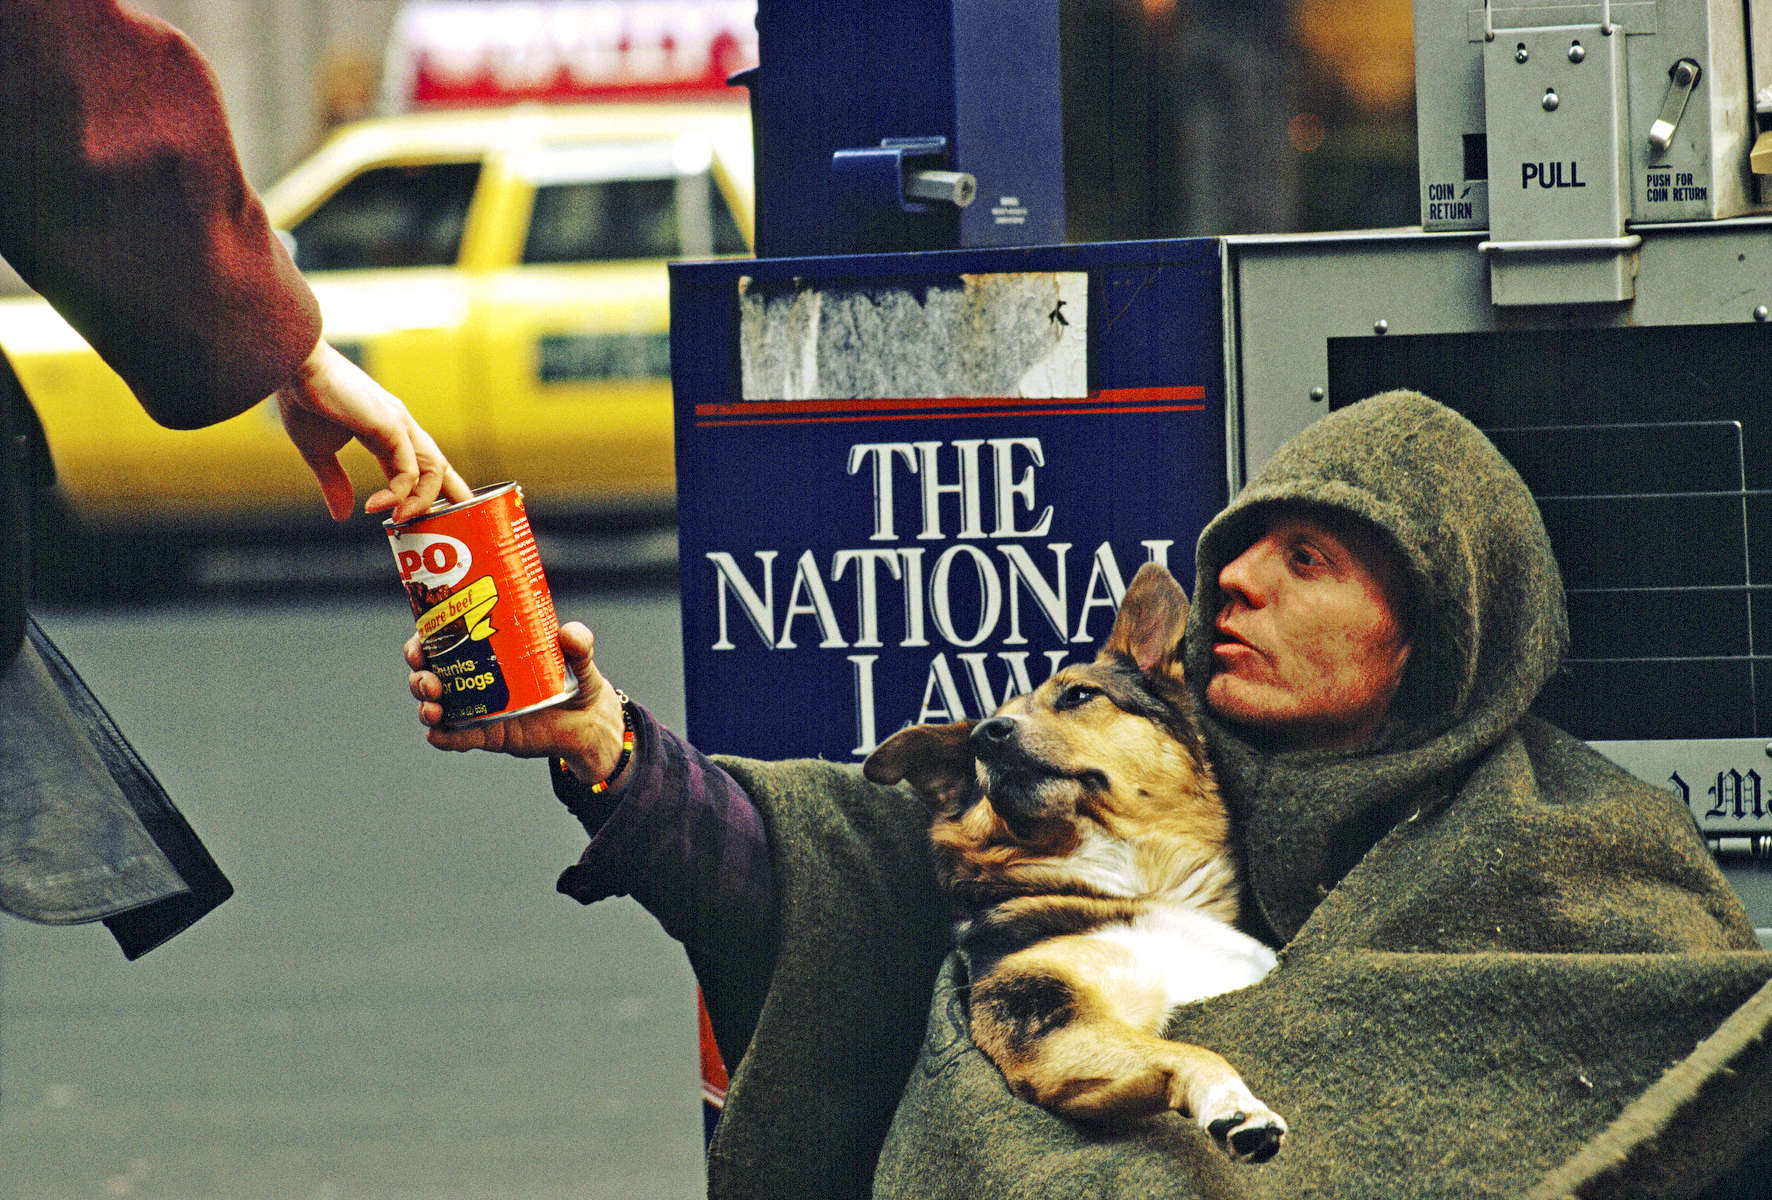 Homeless man with his dog begging on 5th Avenue in New York City.